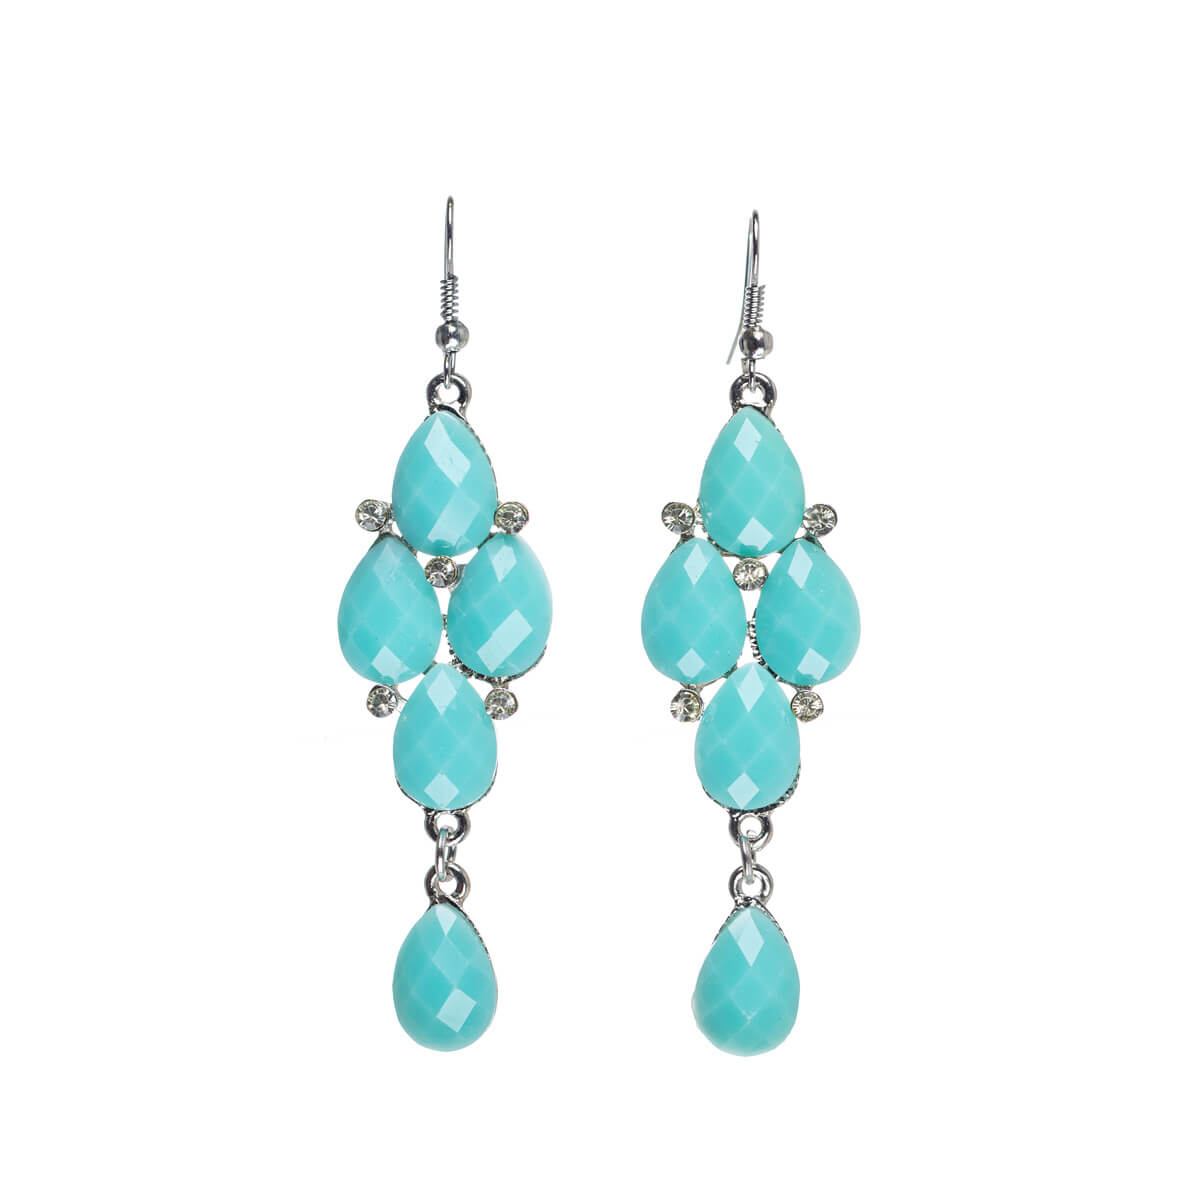 Hanging drop earrings with glass stones